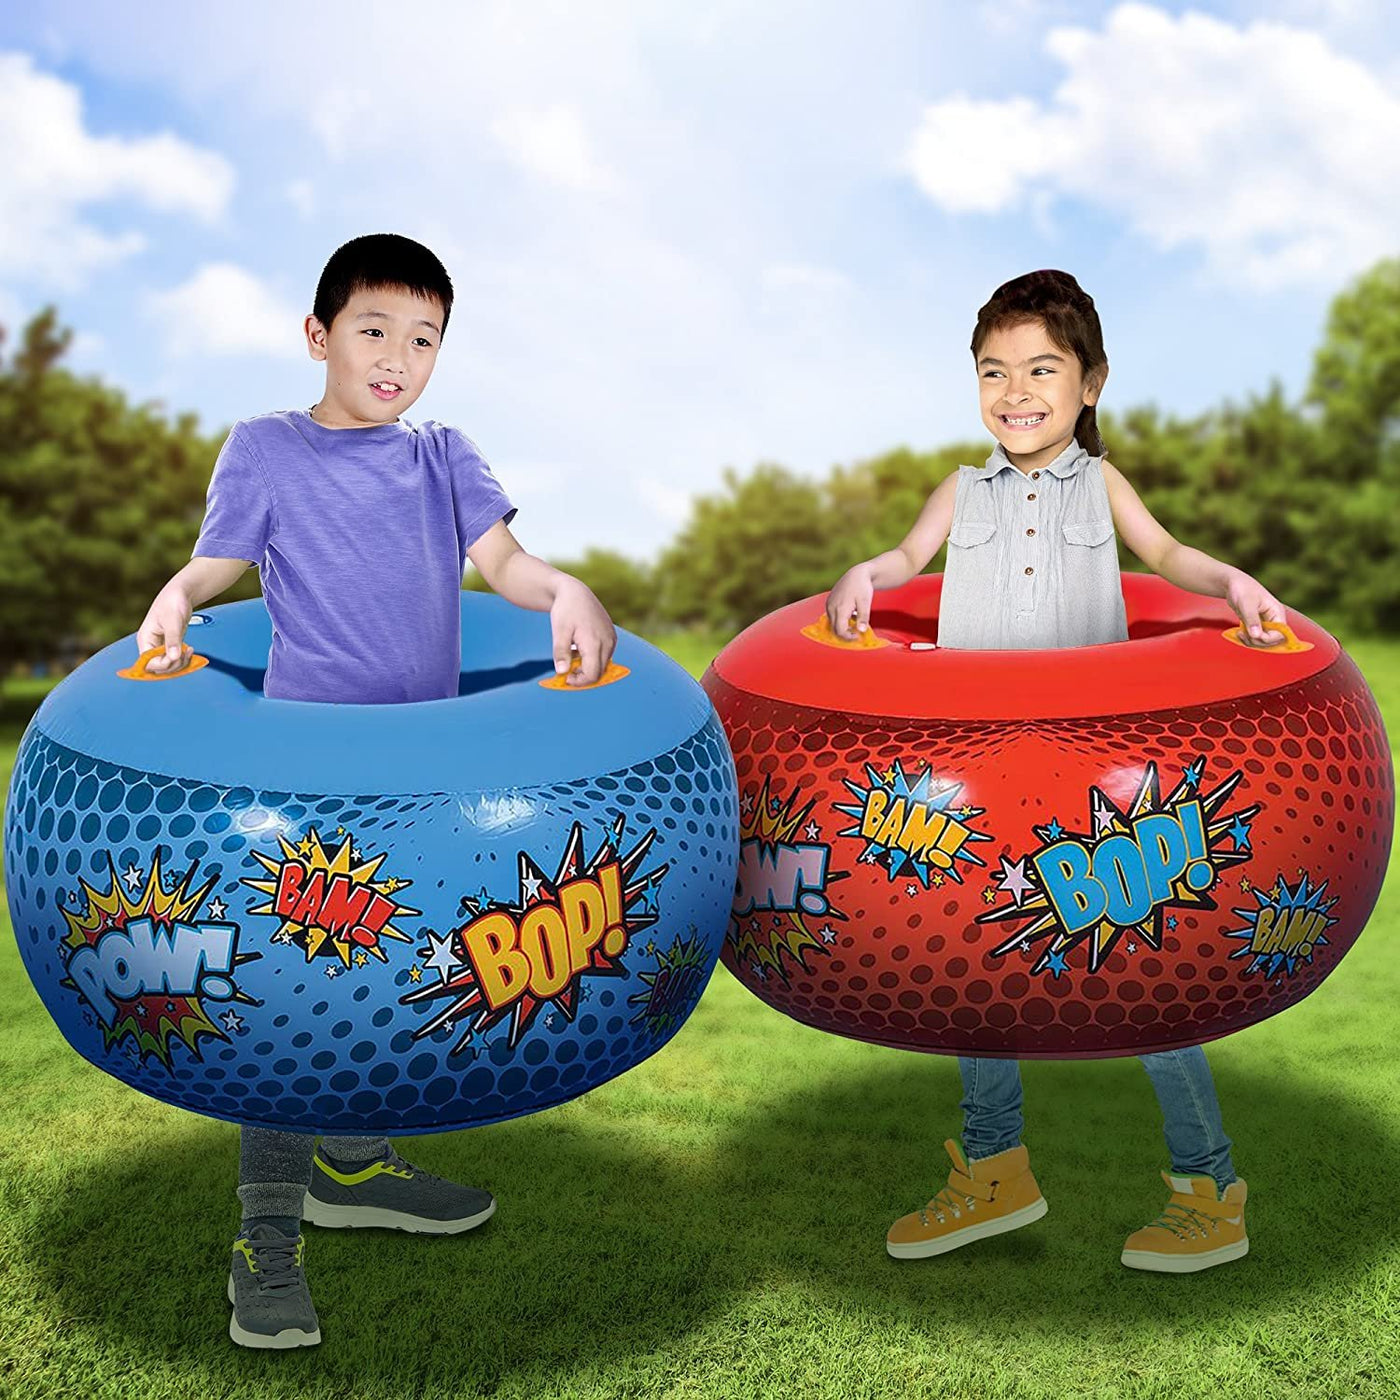 Inflatable Body Bumper Set for Kids - Pack of 2 - Colorful Bump Ball Toys with Handles - Great Summer Game, Fun Birthday Party Activity, Gift Idea for Boys and Girls - Red and Blue